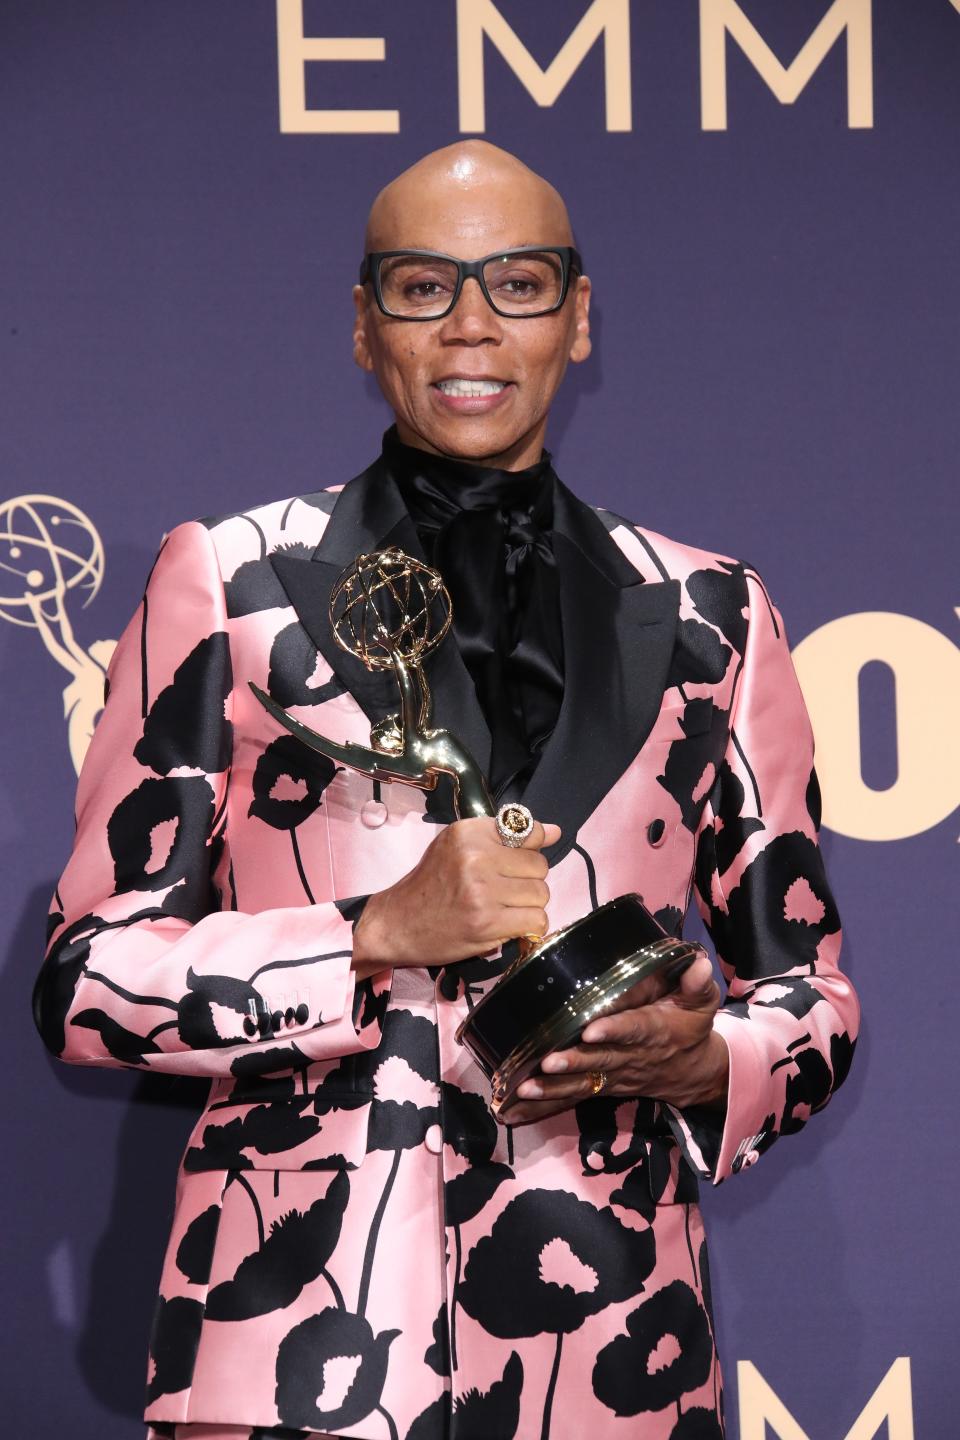 RuPaul poses for photos after "RuPaul's Drag Race" won the Emmy for outstanding competition program at the 2019 ceremony.